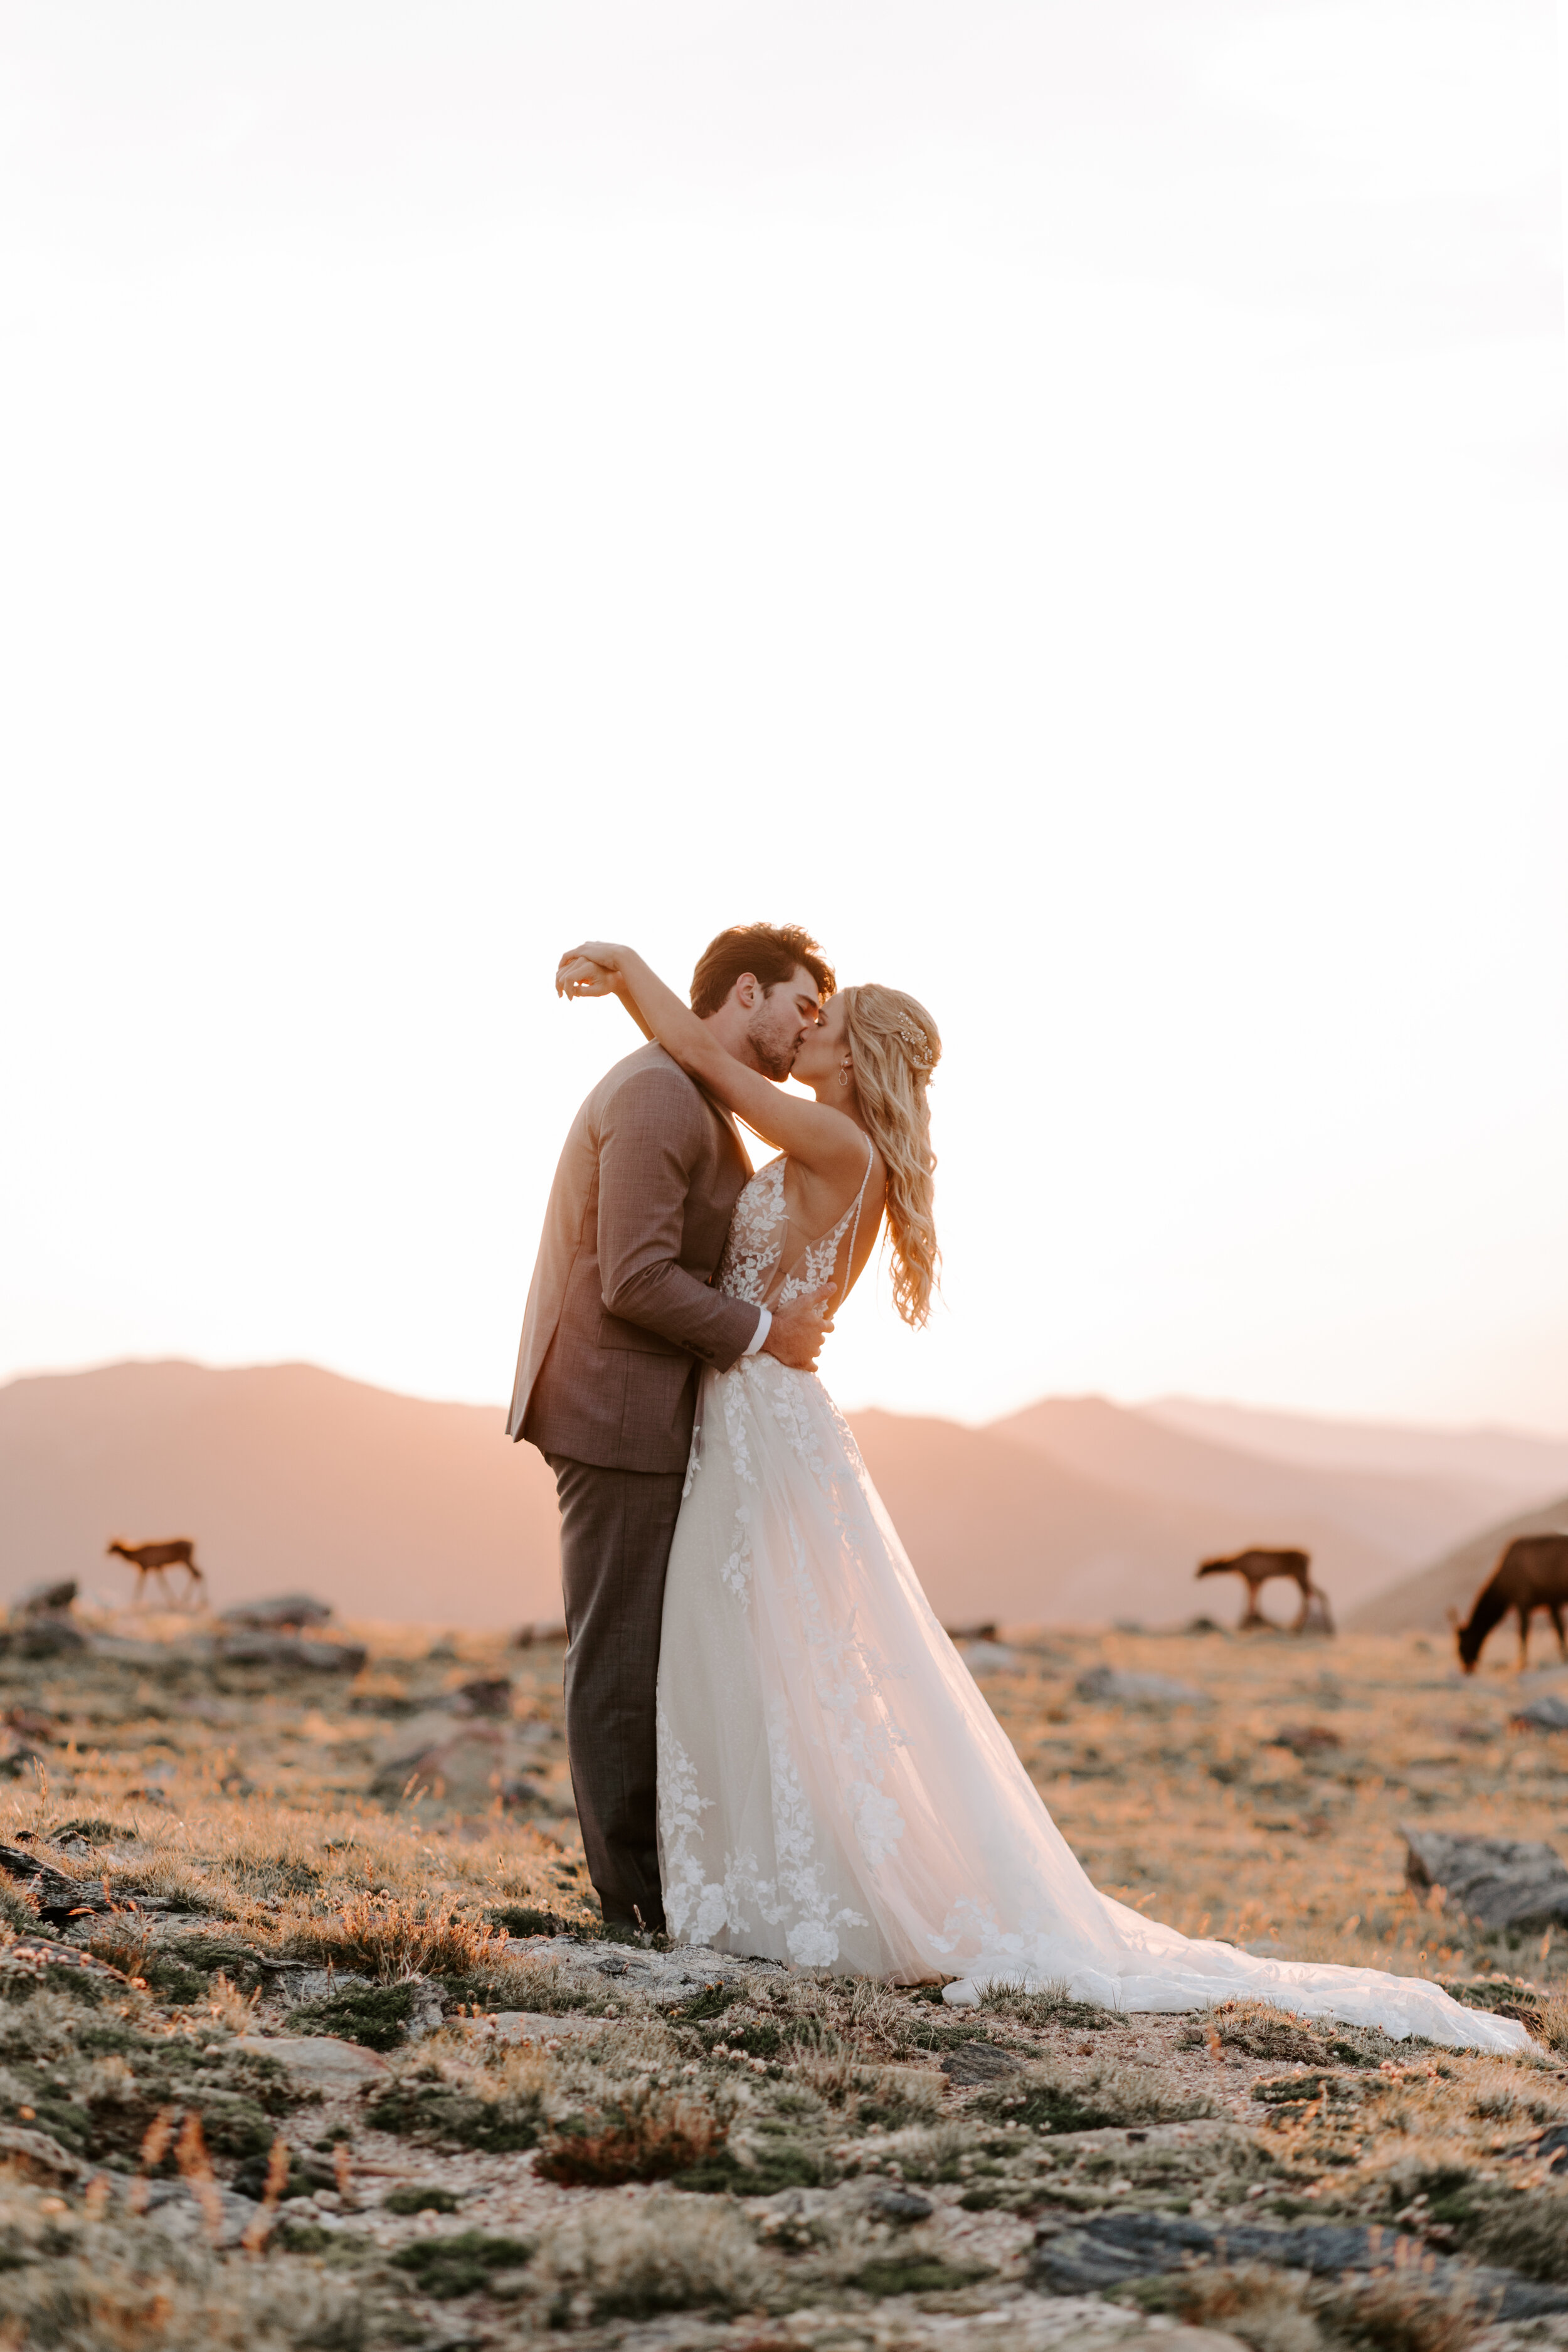 7 Reasons You'll Fall In Love With a Colorado Sunrise Elopement